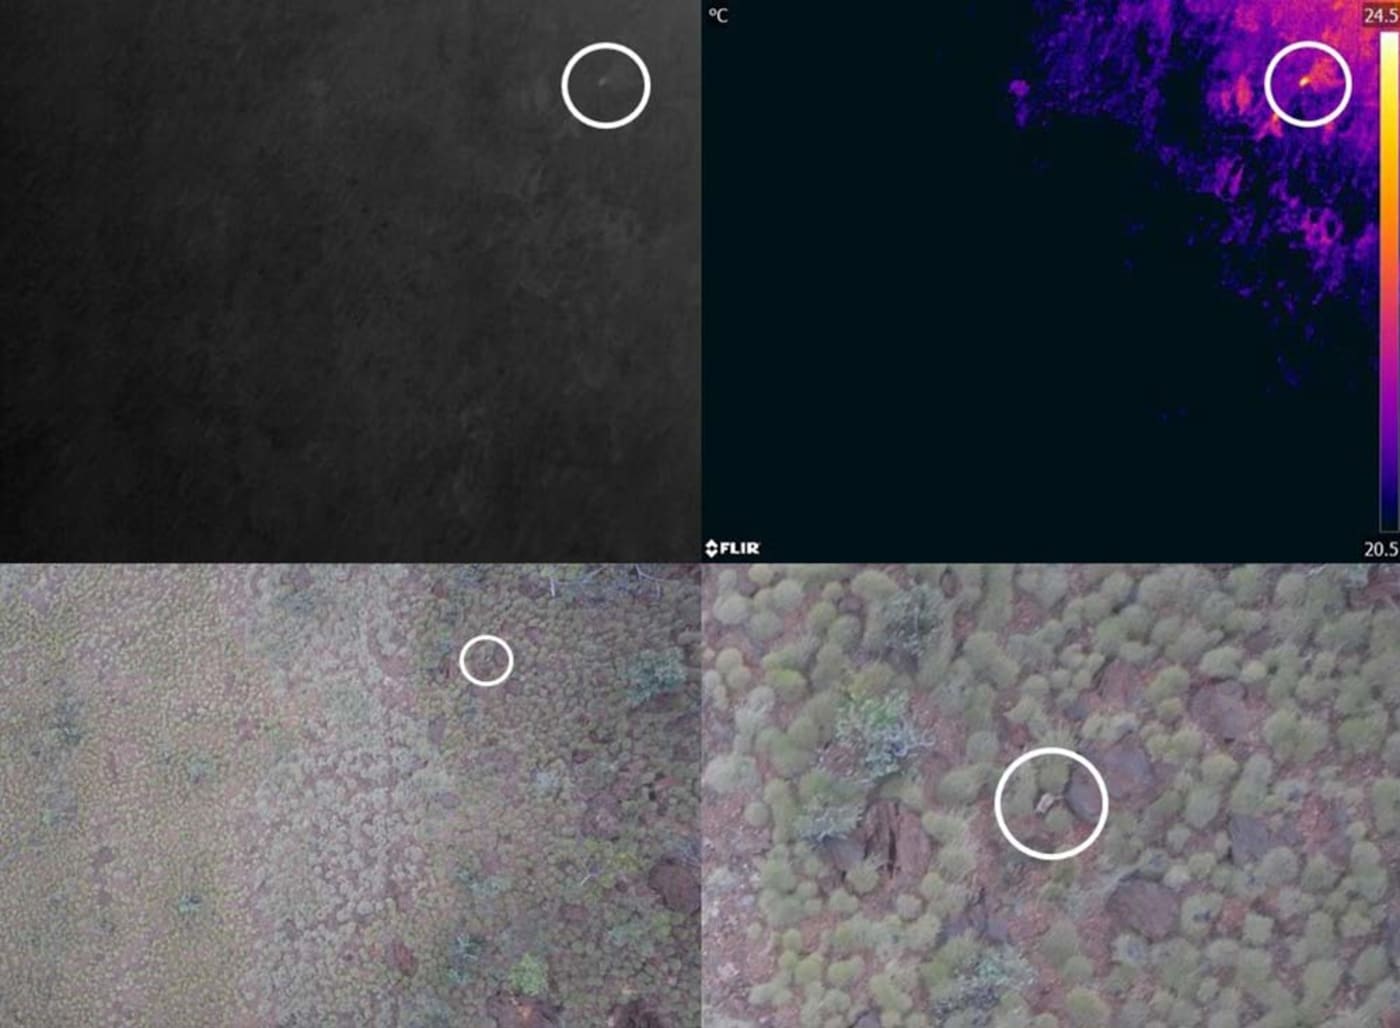 iliji (black-footed rock-wallaby, Petrogale lateralis kimberleyensis, circled) spotted on standard, night vision (top left) and thermal drone camera (top right)